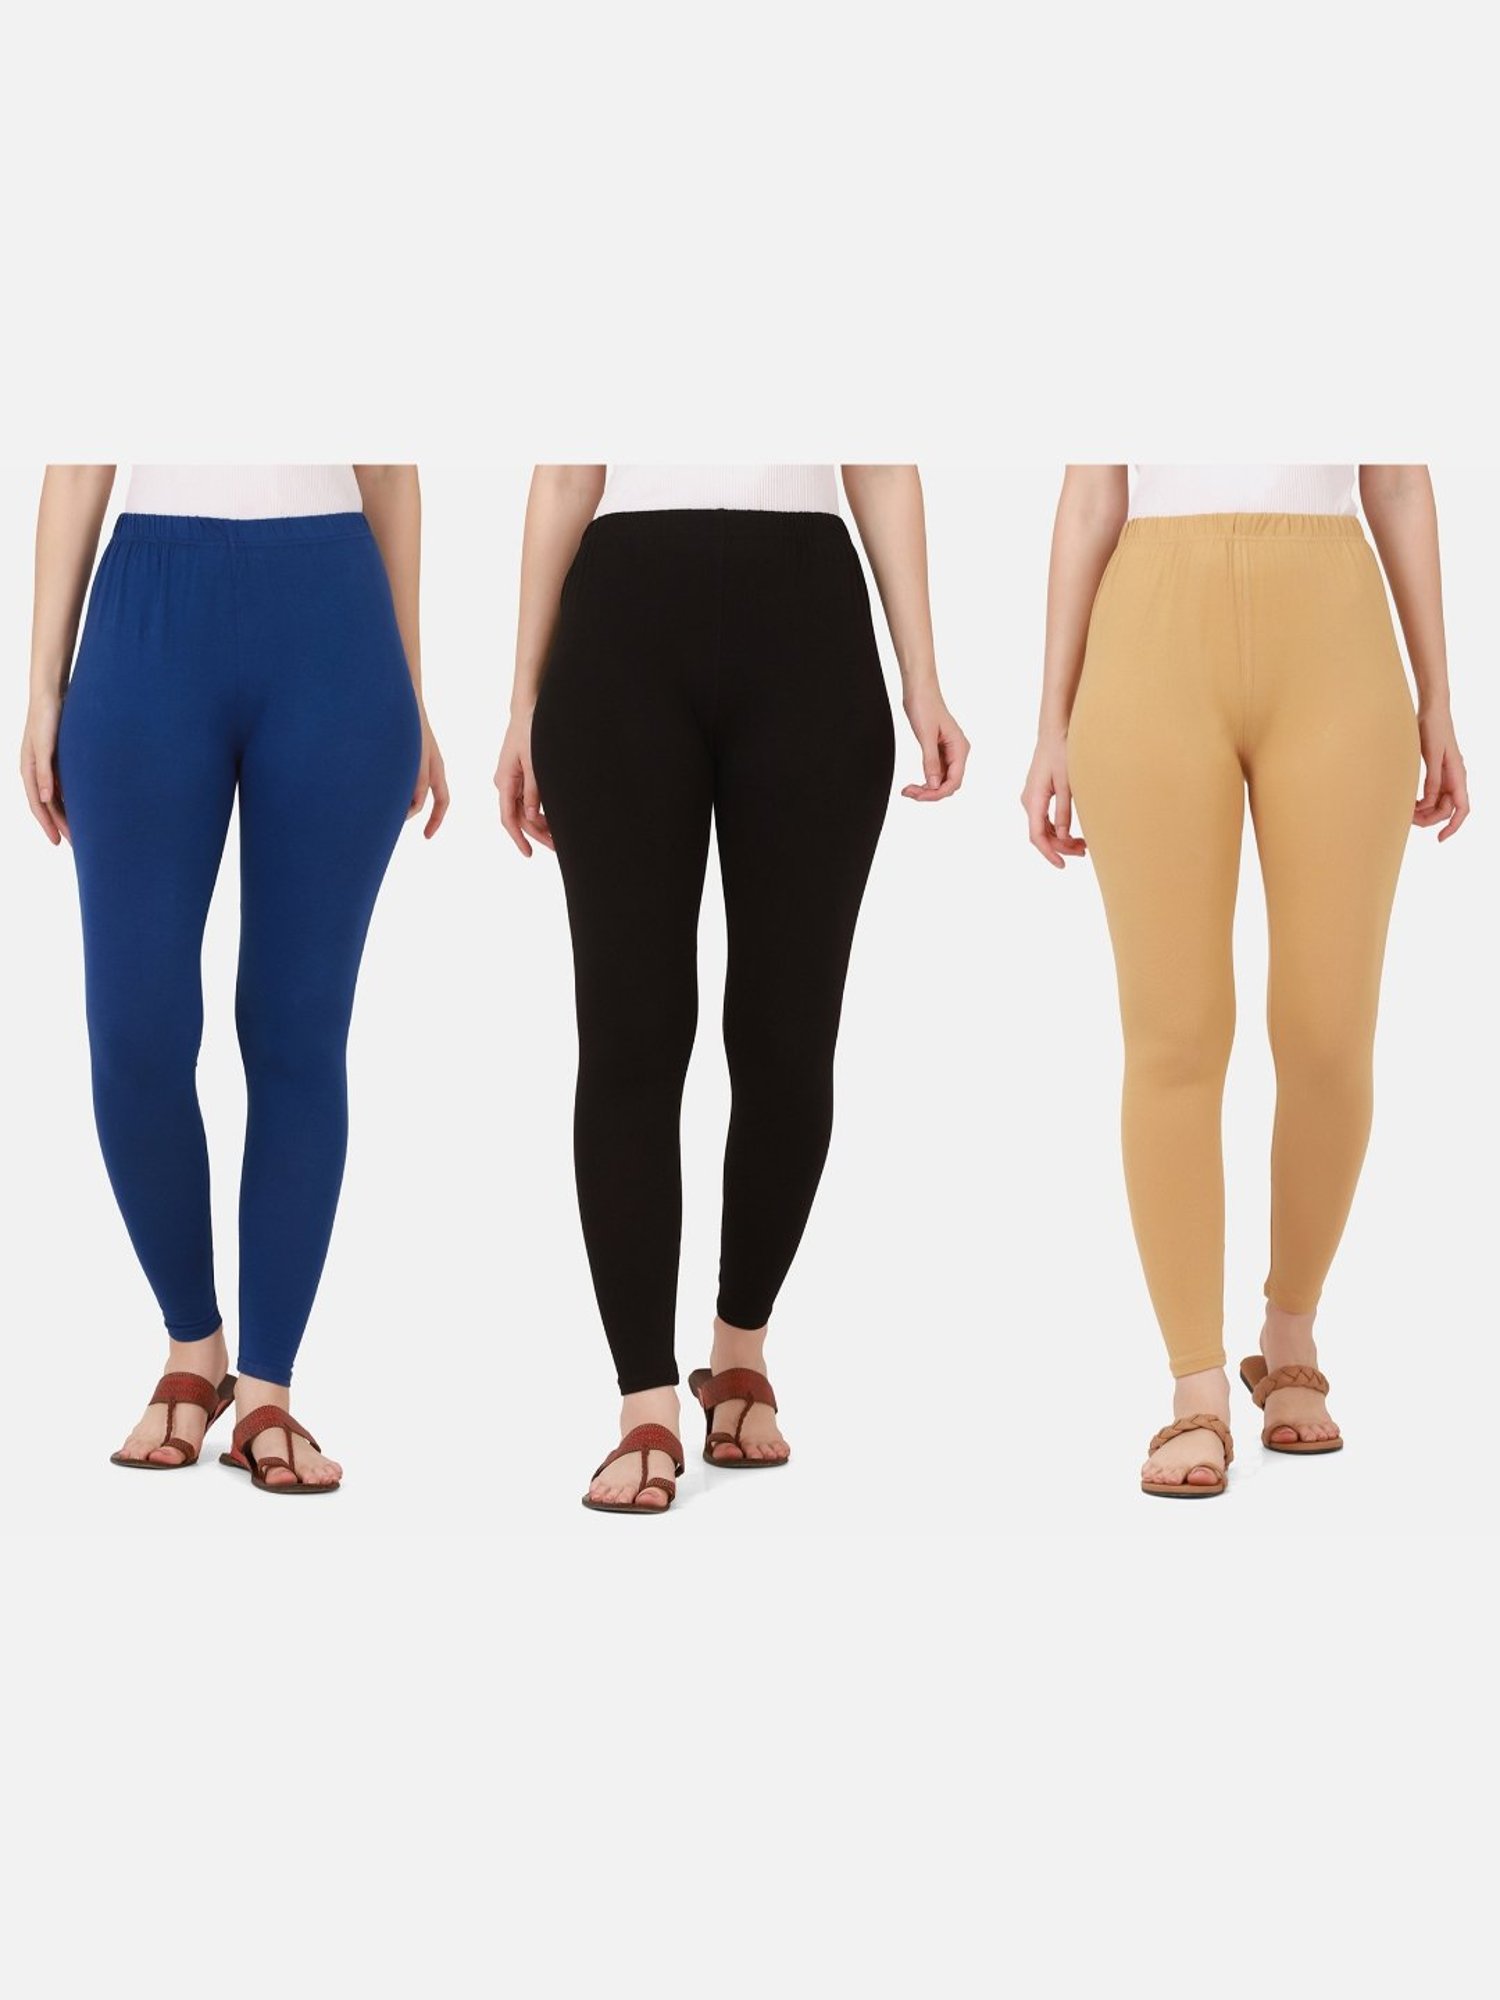 Ankle Length Leggings In Delhi (New Delhi) - Prices, Manufacturers &  Suppliers